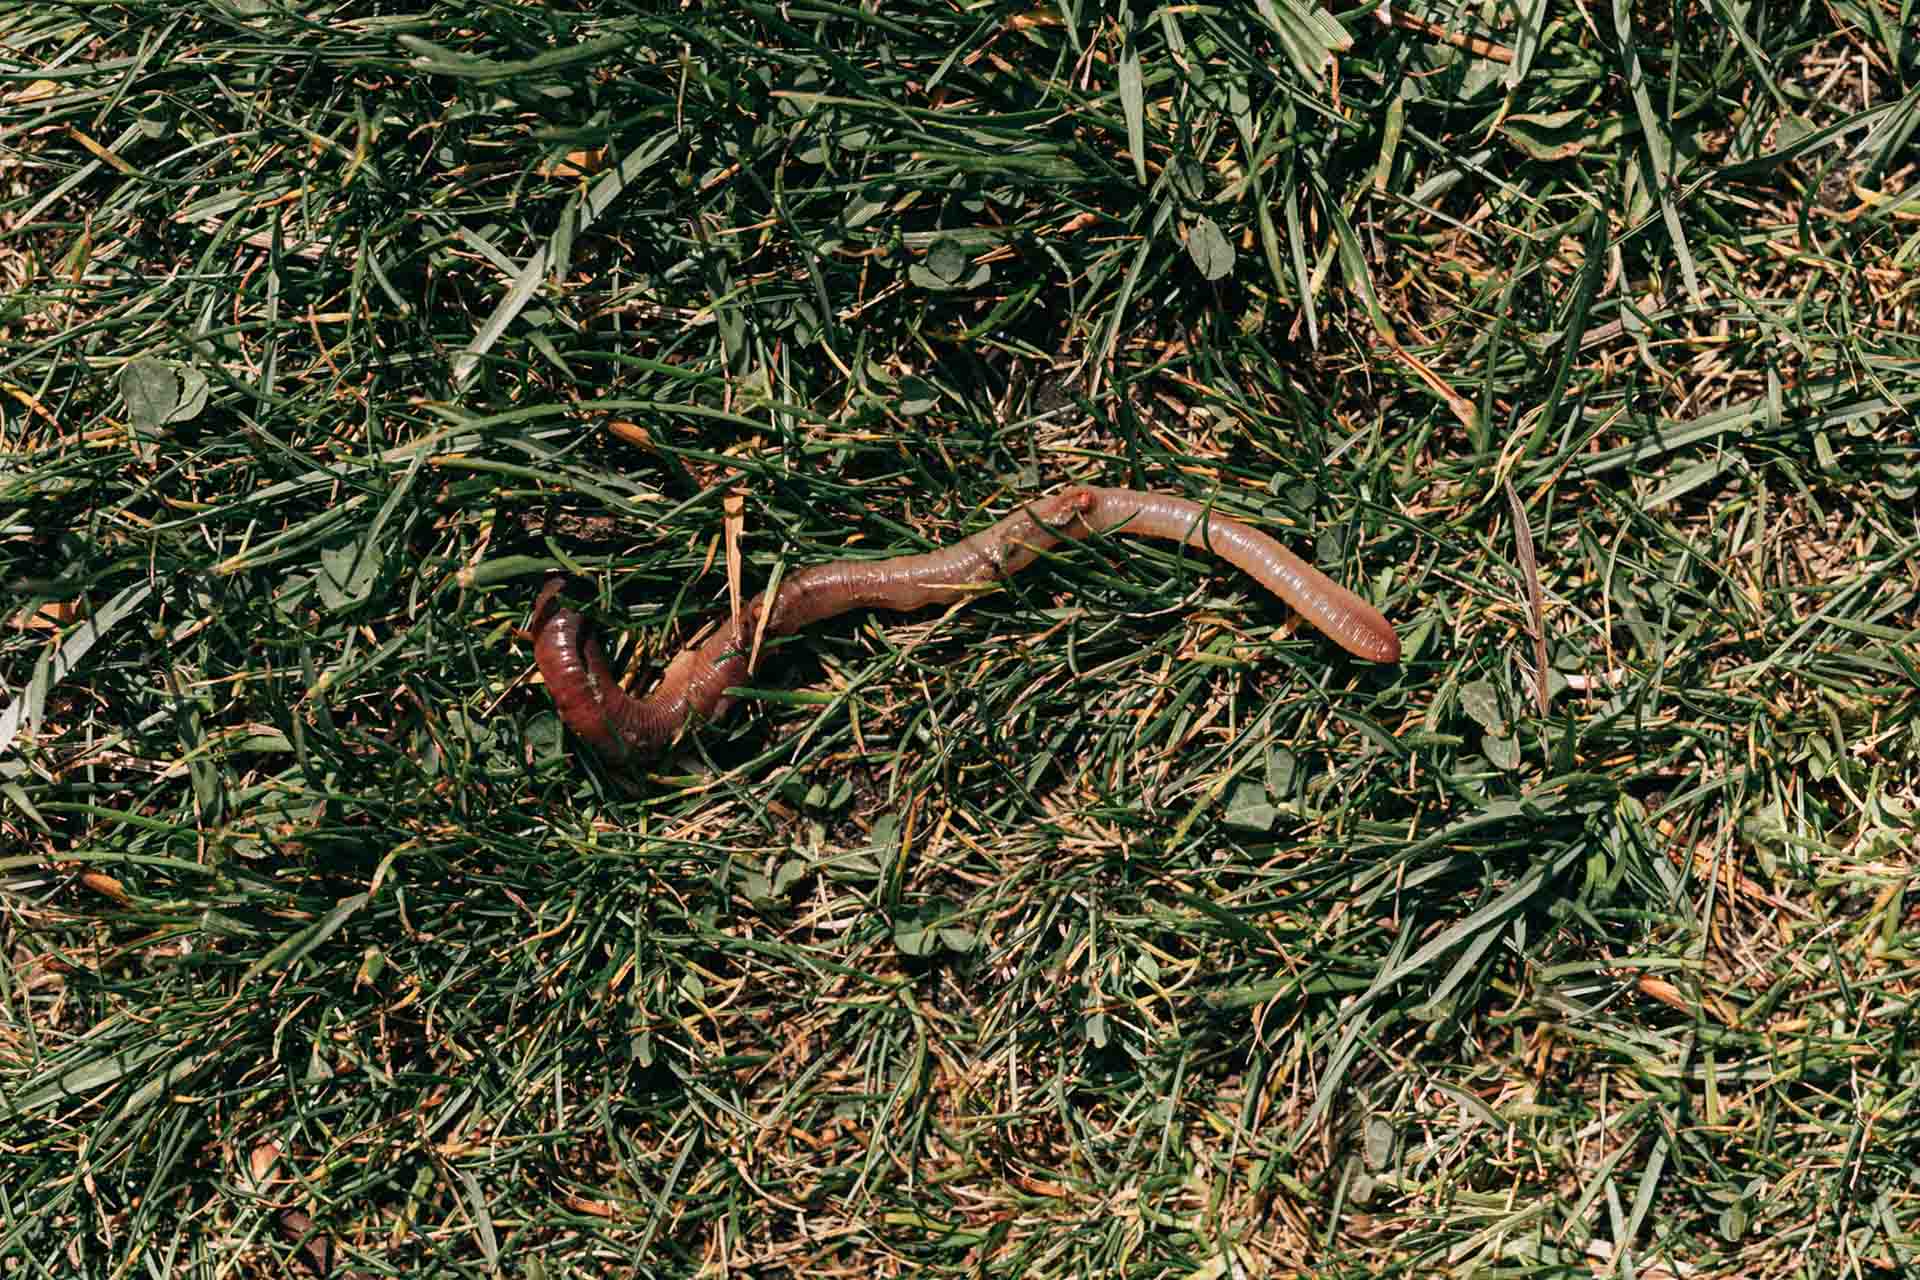 Earthworm crawling on the grass